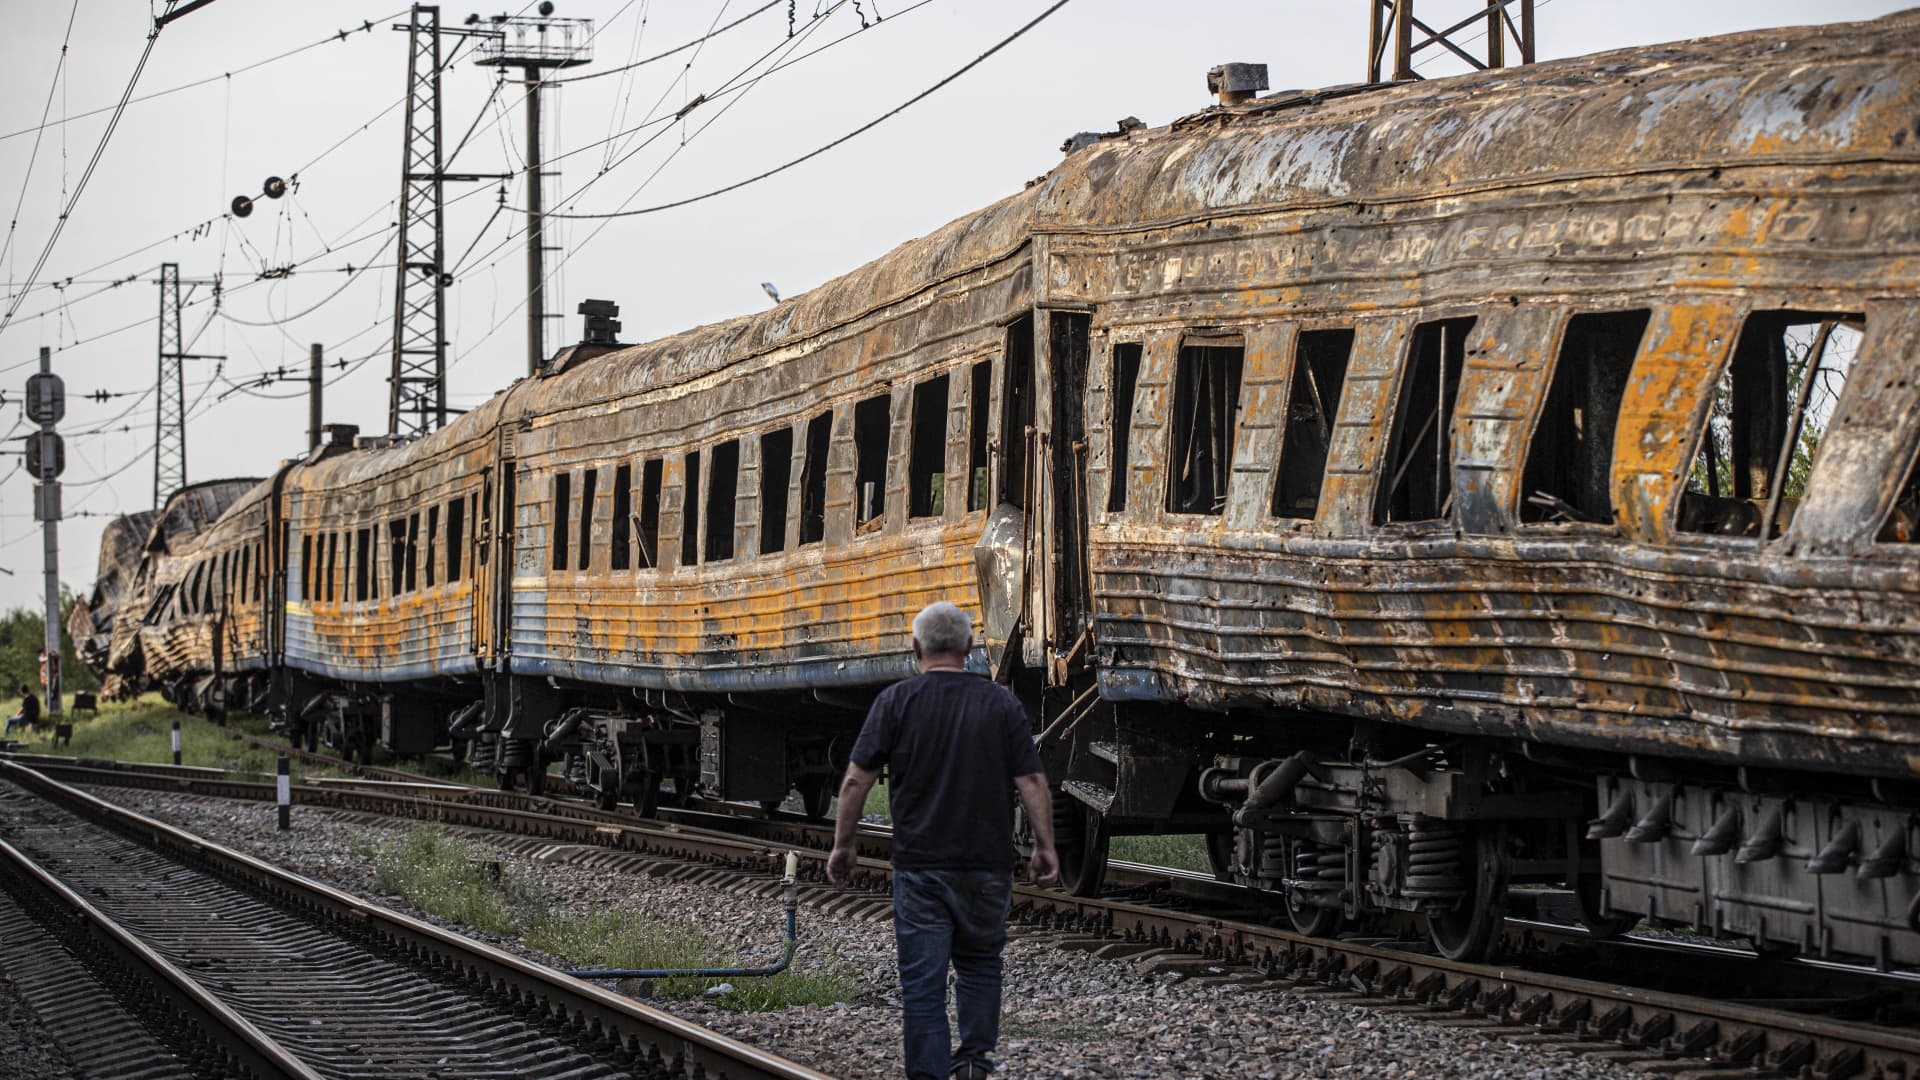 A general view of the Ukrainian railway station damaged by a Russian missile strike in Chaplyne, Dnipropetrovsk Oblast, Ukraine on August 25, 2022. At least 25 people have been killed in a Russian rocket attack on the Chaplyne railway station as Ukraine marked its Independence Day.